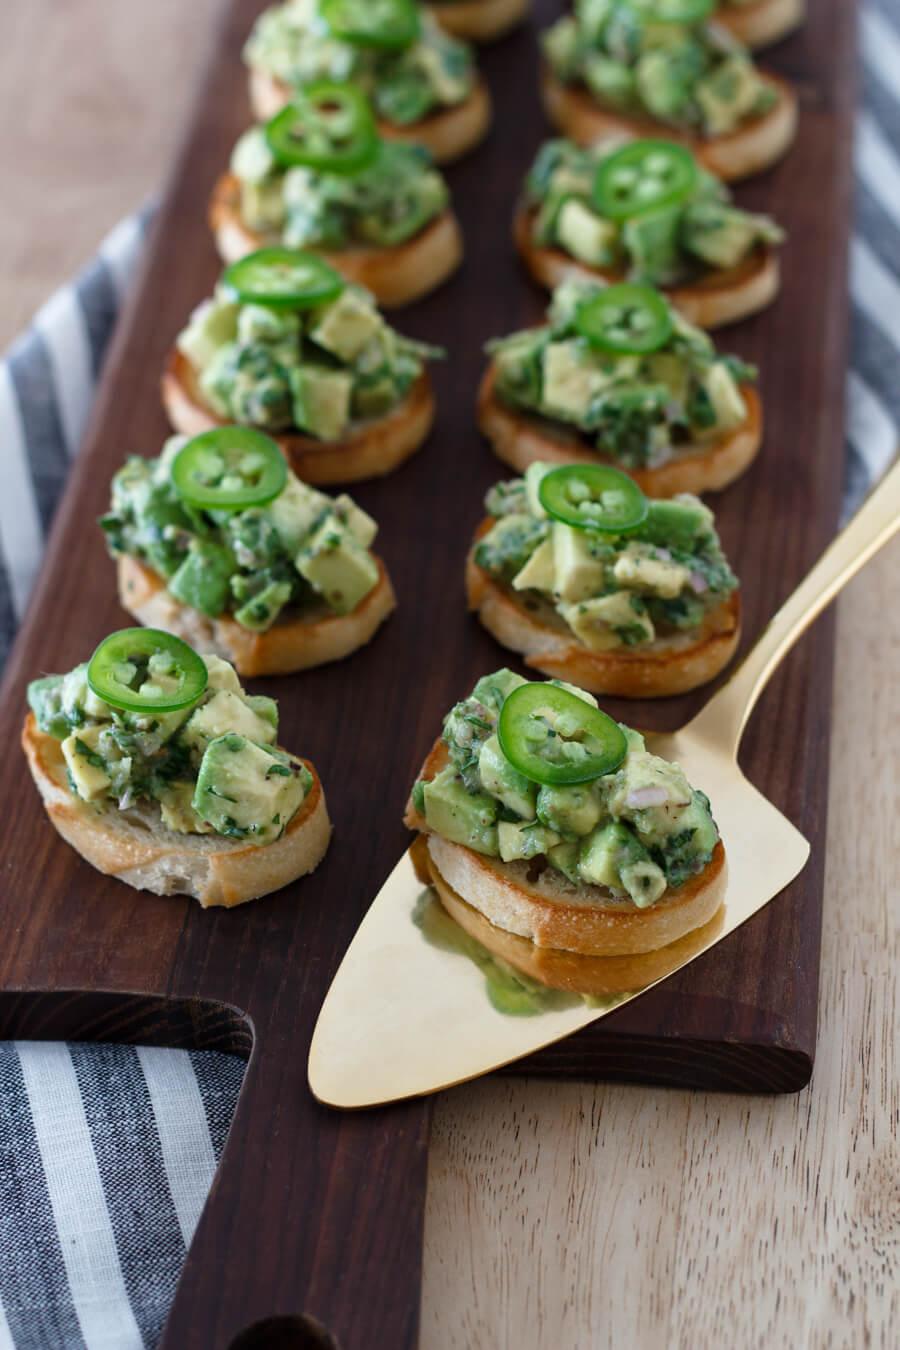 Delicious bruschetta topped with an aromatic mixture of avocados, herbs, garlic, and jalapenos. They are easy to make and perfect for a snack, appetizer, or tapas dinner. Recipe at www.designsofanykind.com